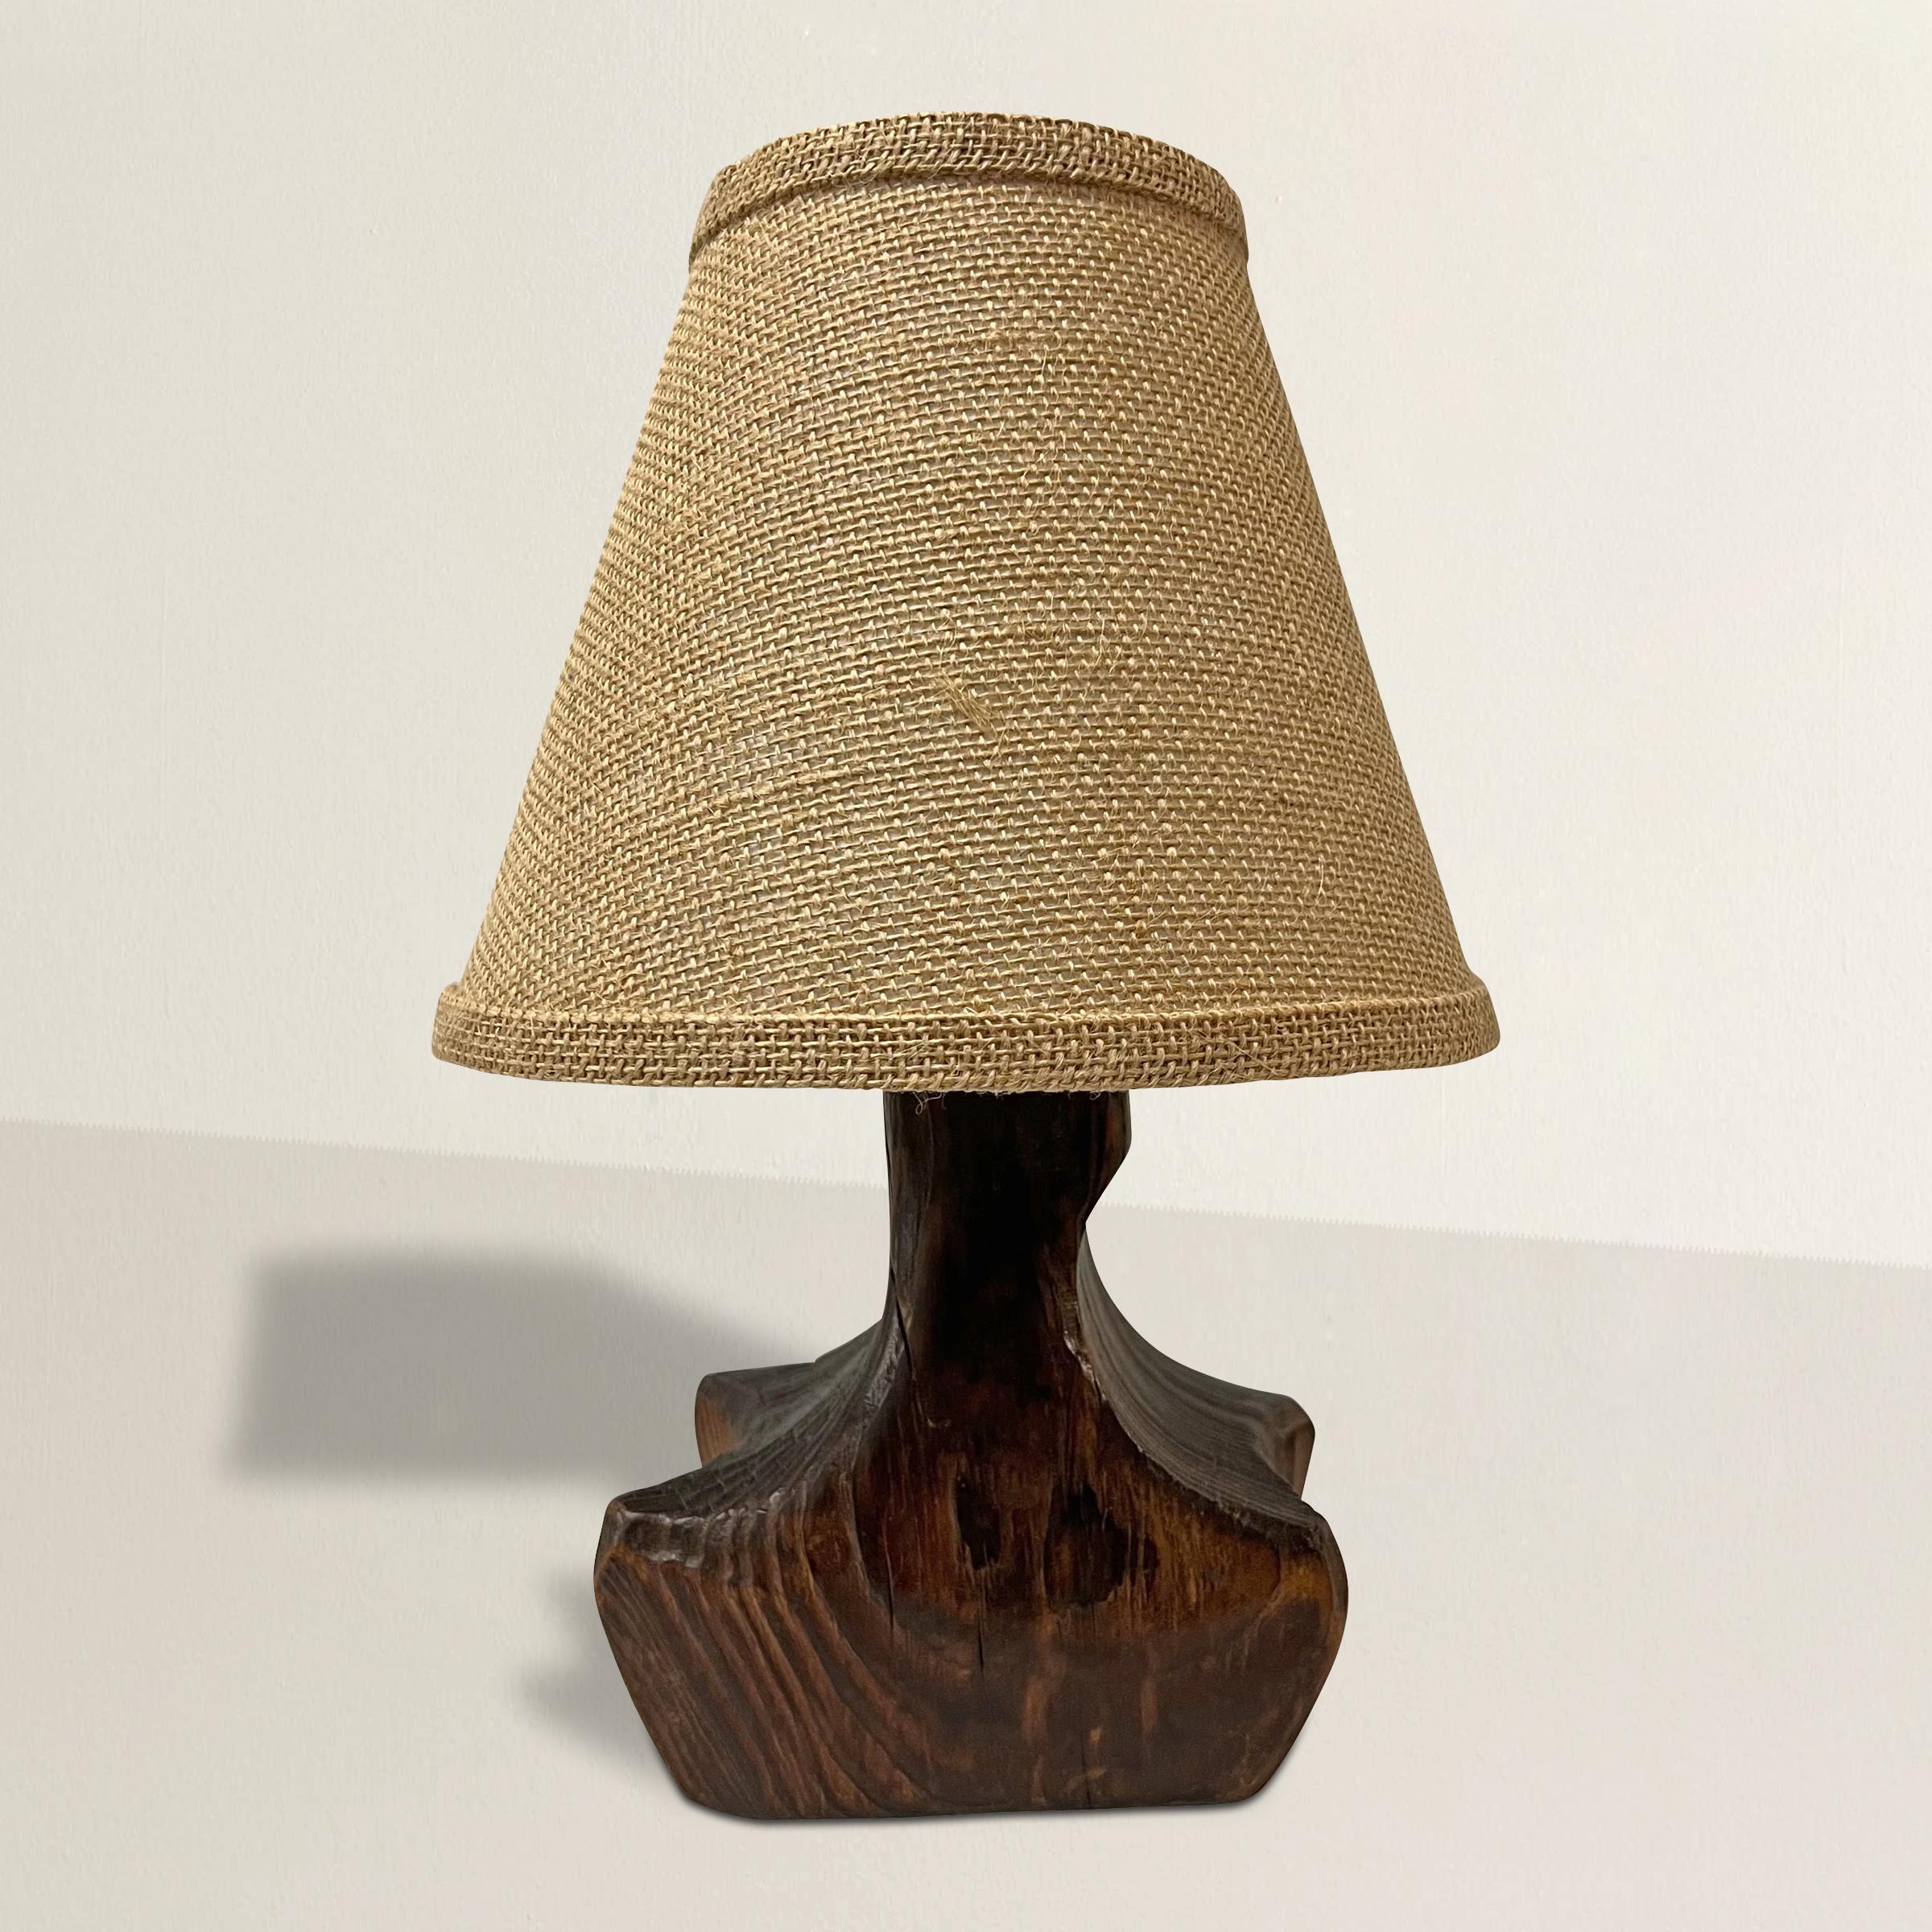 A chic and handsome early 20th century French Modernist wood lamp of organic shape, and with a custom-made burlap shade, newly wired for U.S. with a gold twist silk cord.  The perfect size for your powder room, bedroom, or entry table.